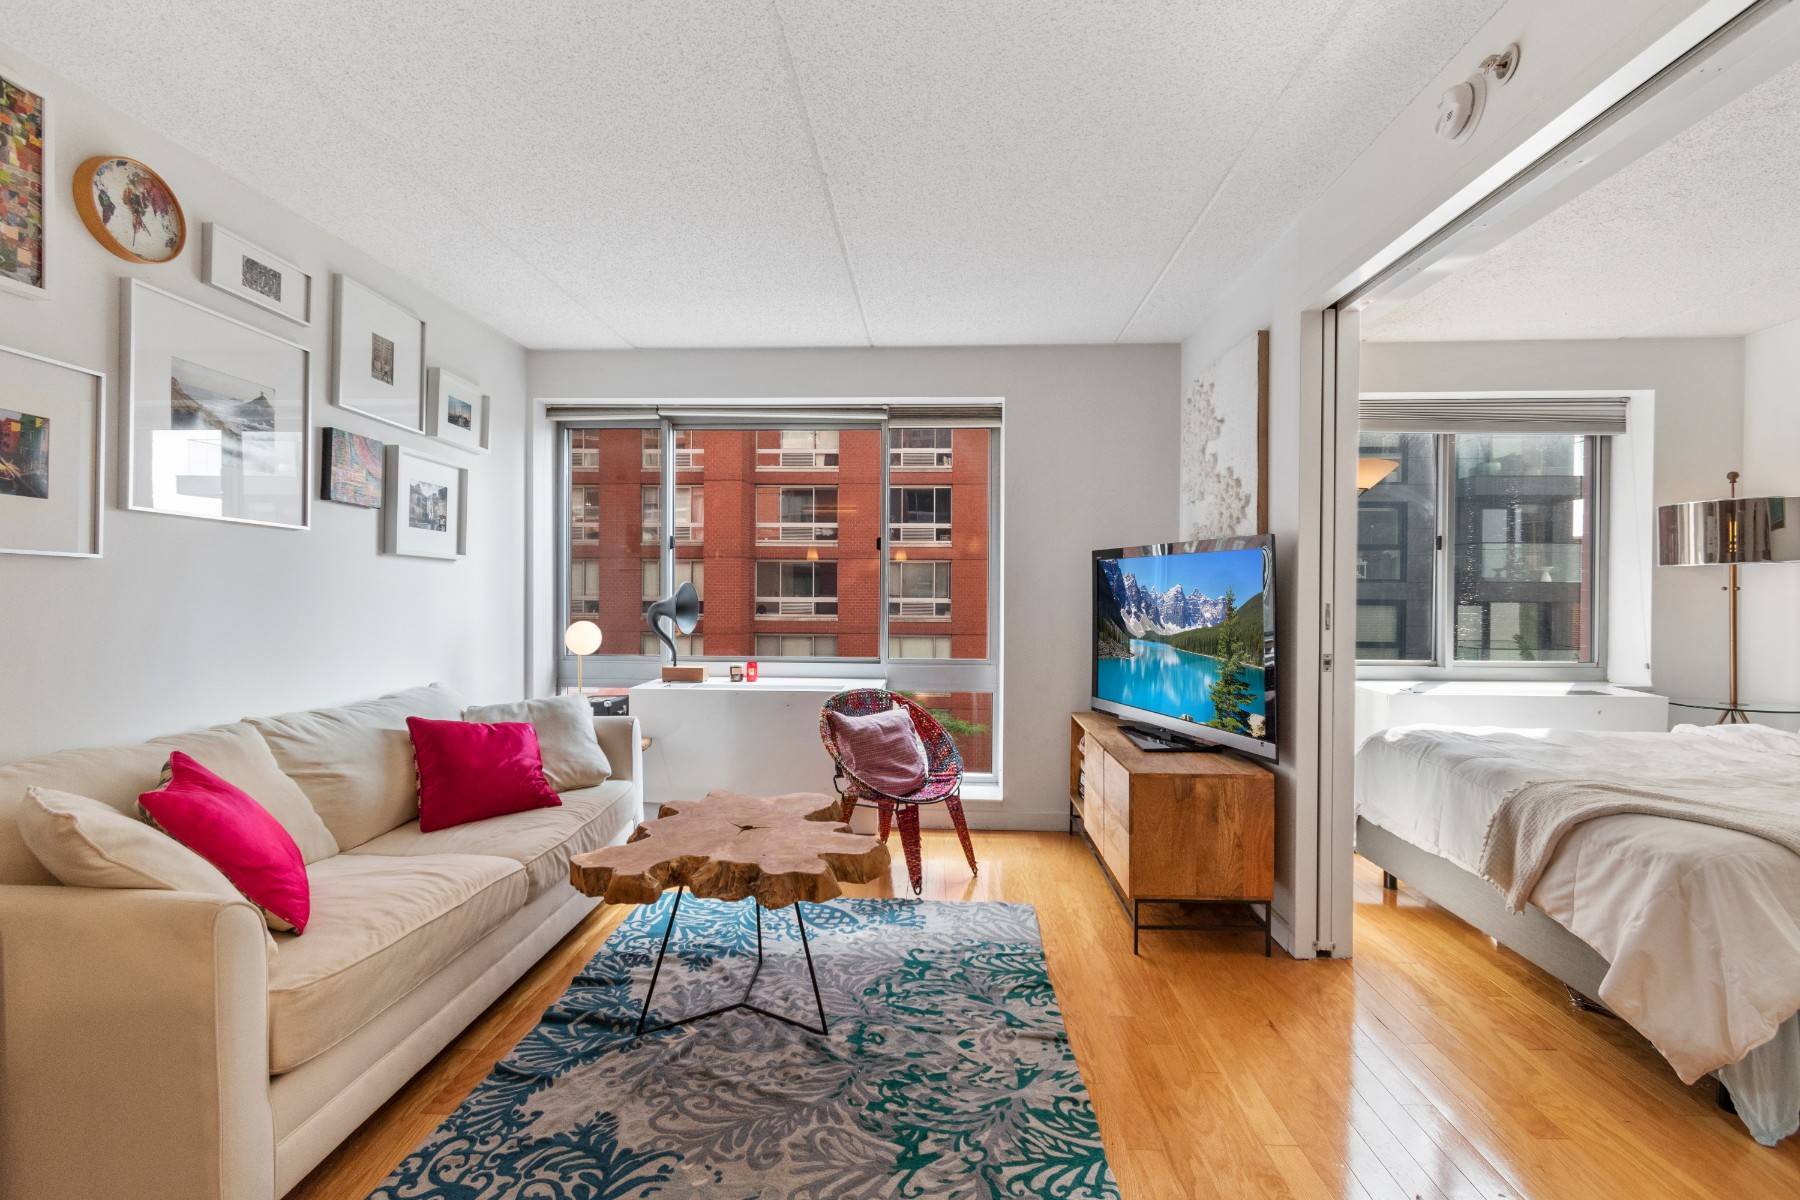 This one bedroom apartment in the heart of the West Chelsea Art District offers an open kitchen with breakfast bar that is perfect for entertaining guests.